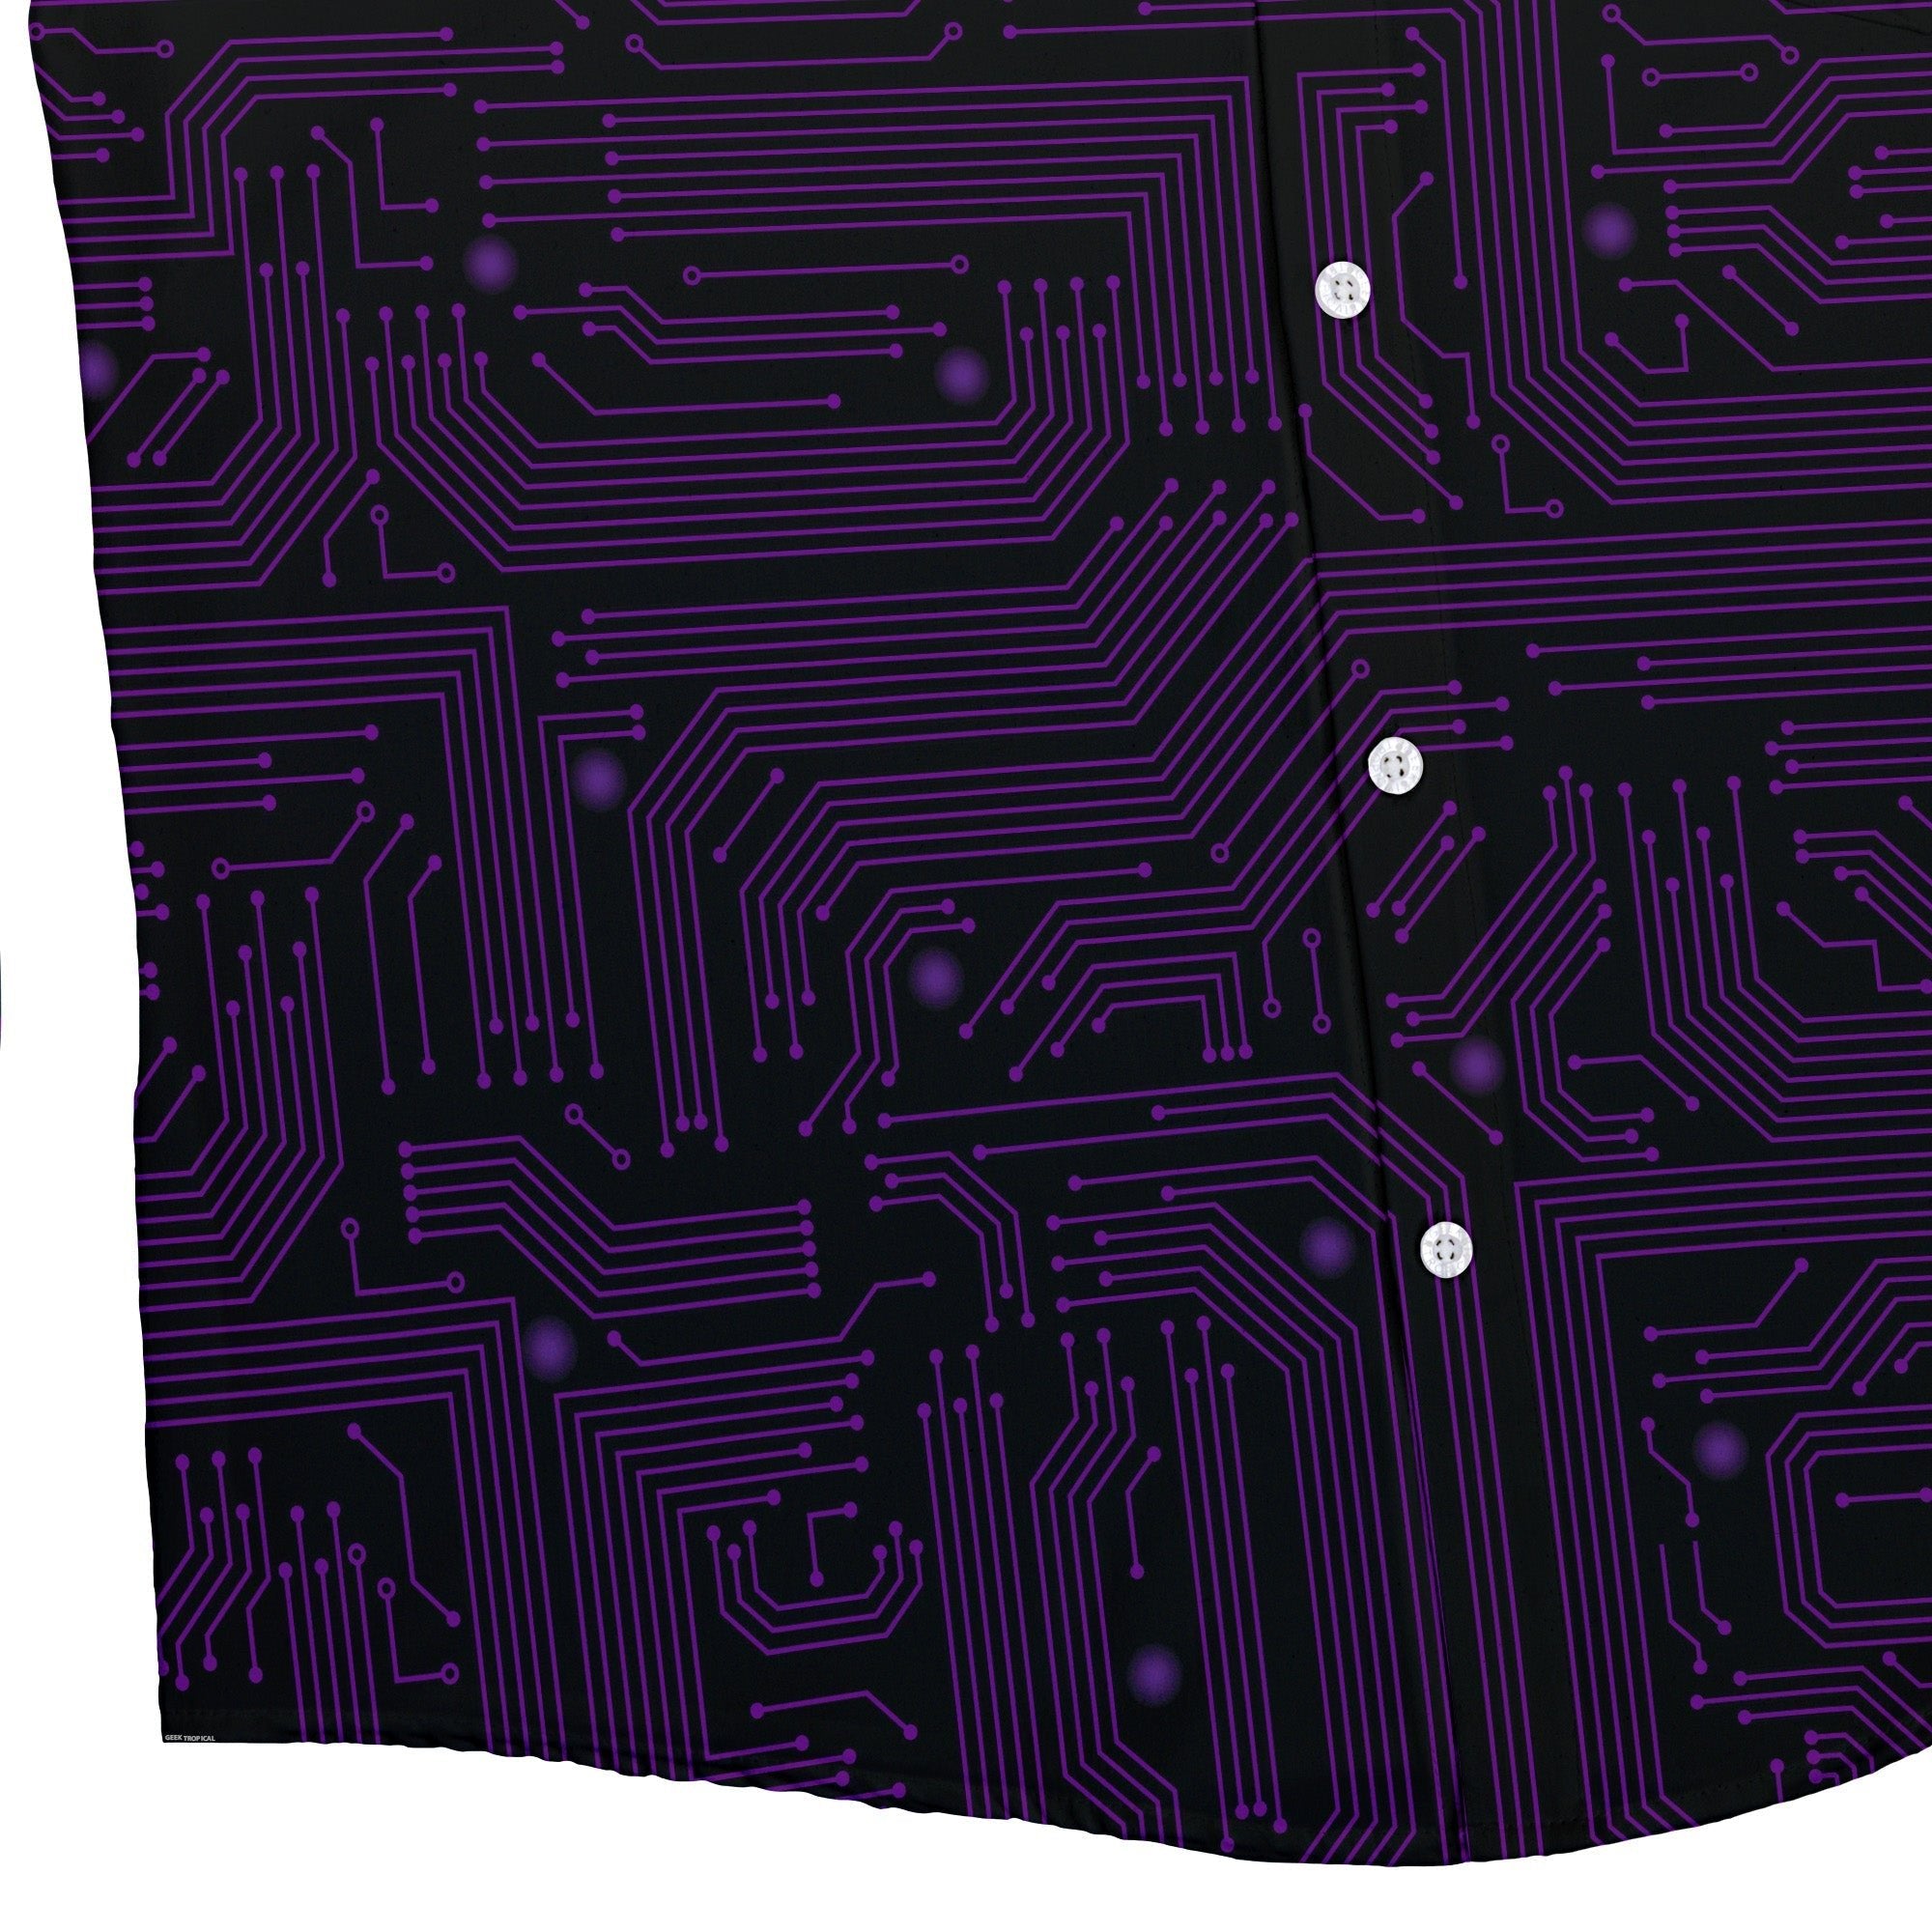 Purple Computer Circuit Board Button Up Shirt - adult sizing - computer print -